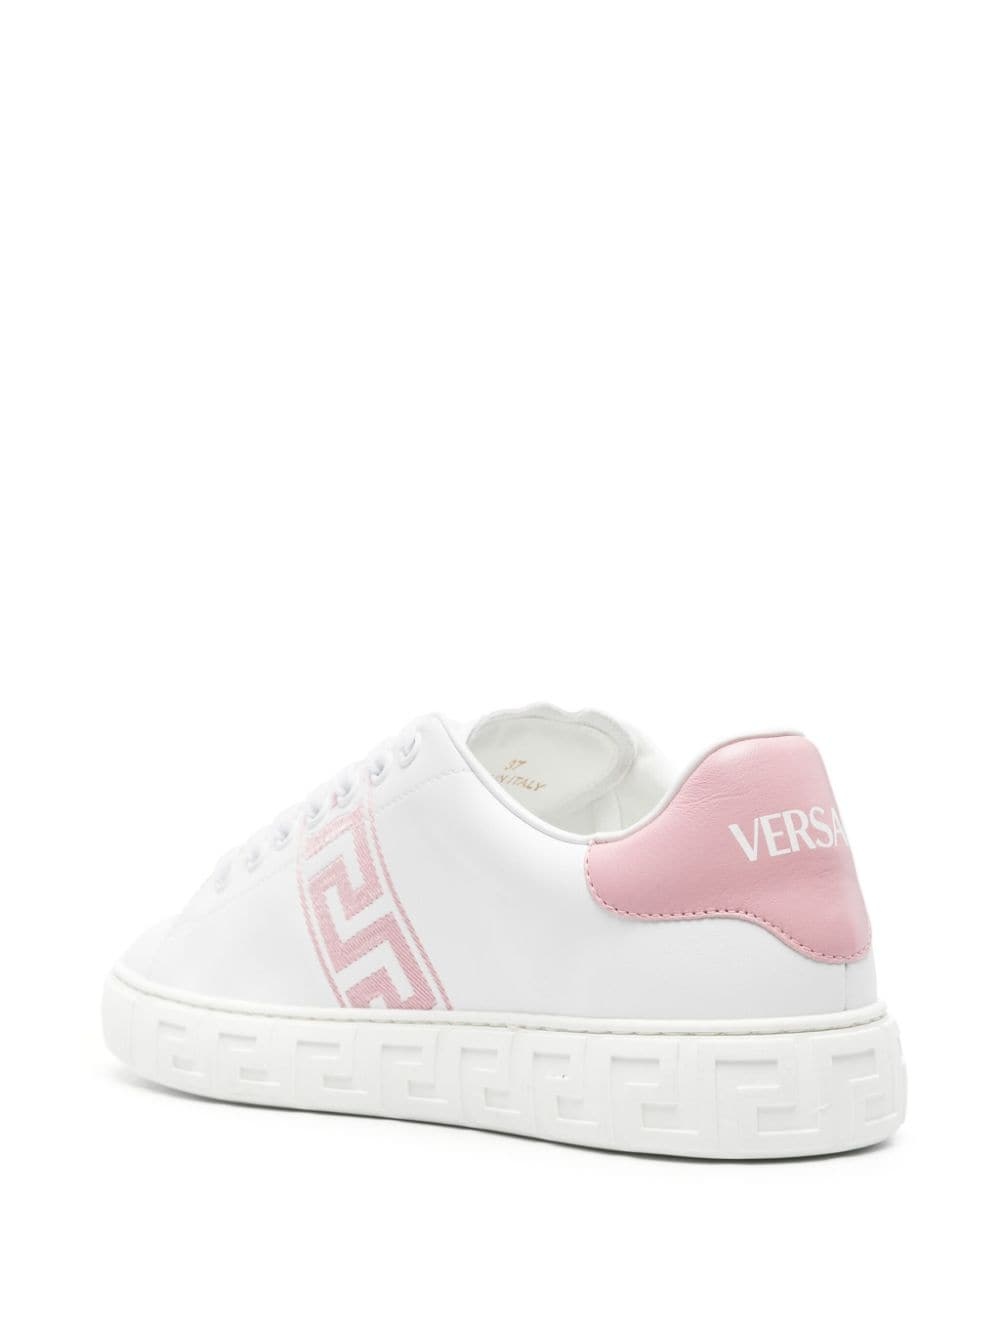 Greca-embroidered sneakers - 3